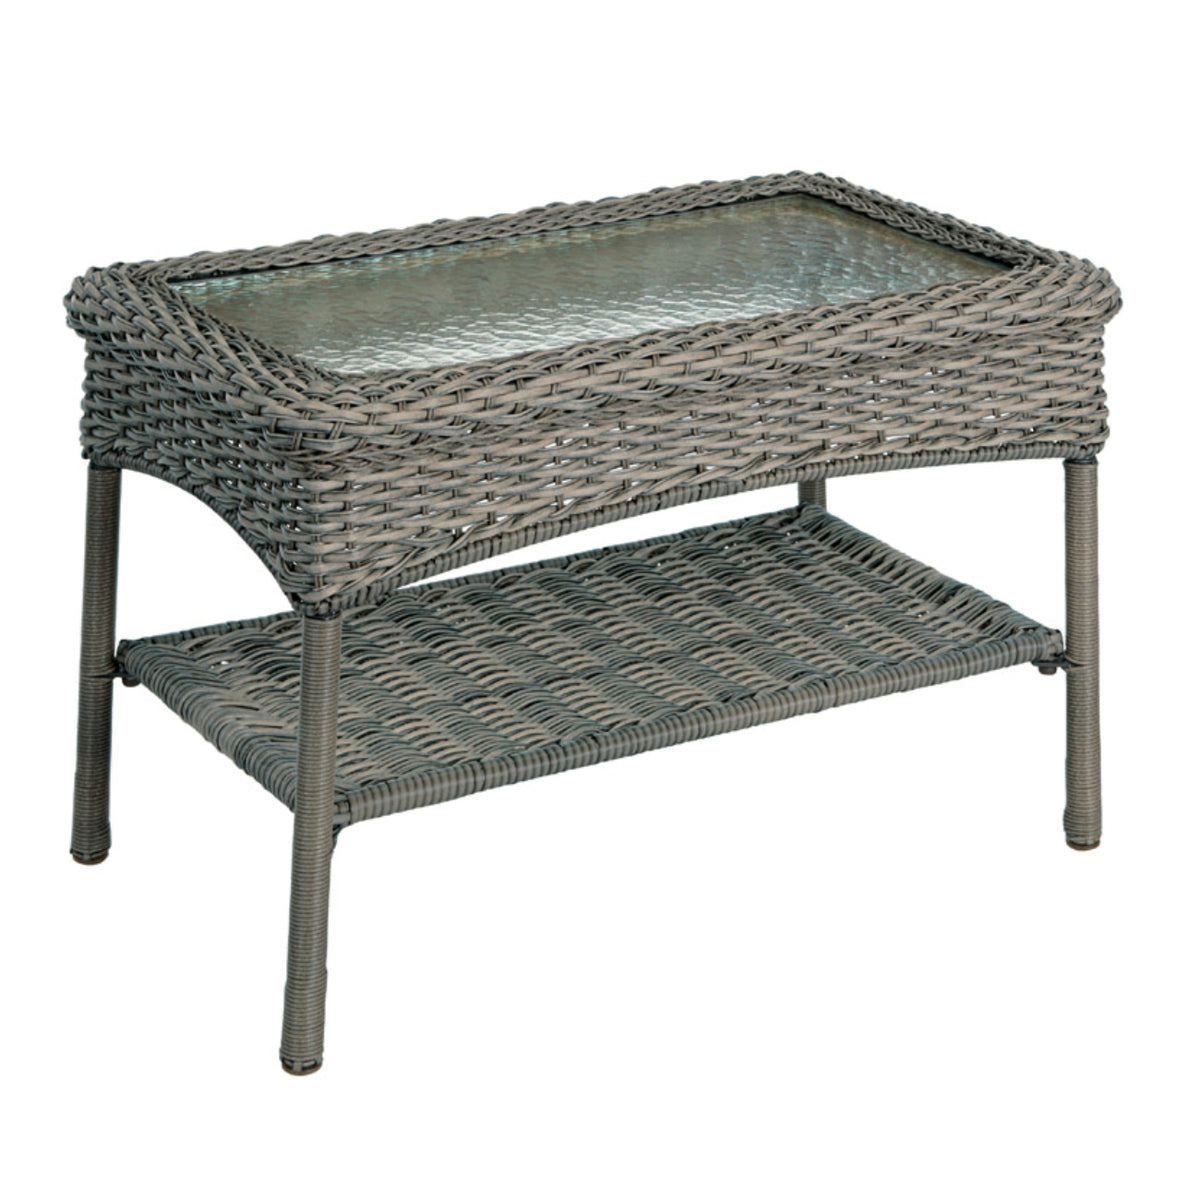 buy outdoor coffee tables at cheap rate in bulk. wholesale & retail outdoor living items store.